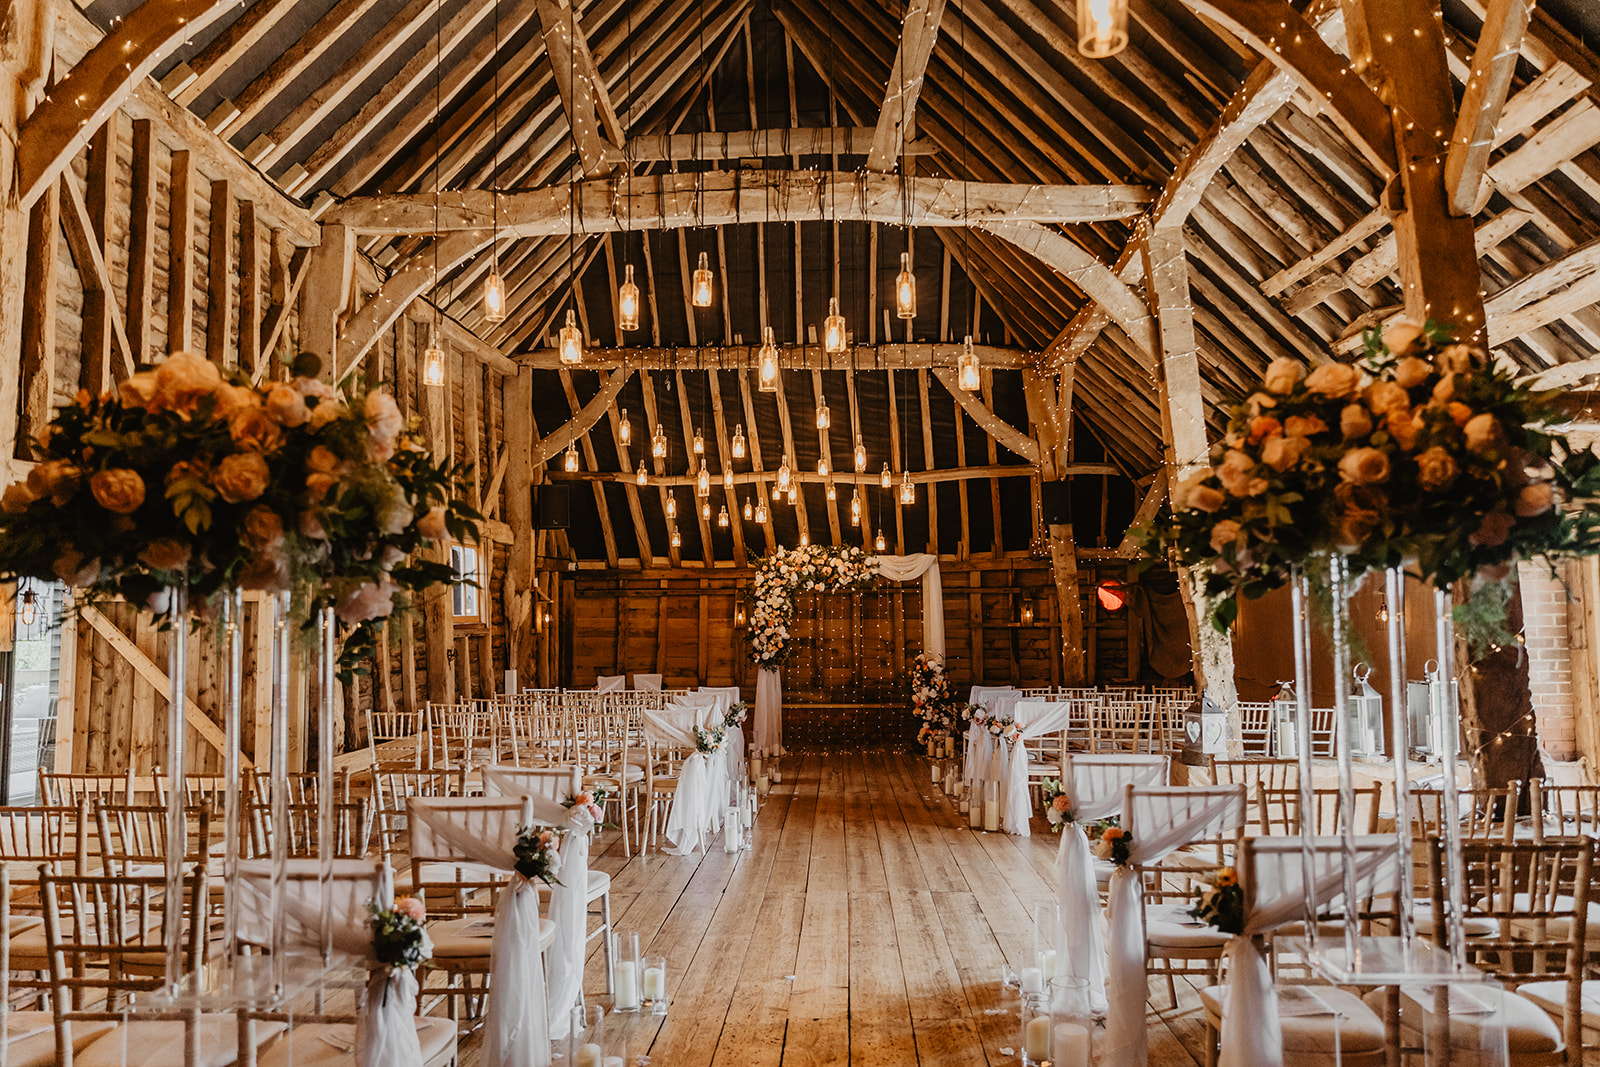 Ceremony room at a Southlands barn wedding, Sussex. Photo by OliveJoy Photography.